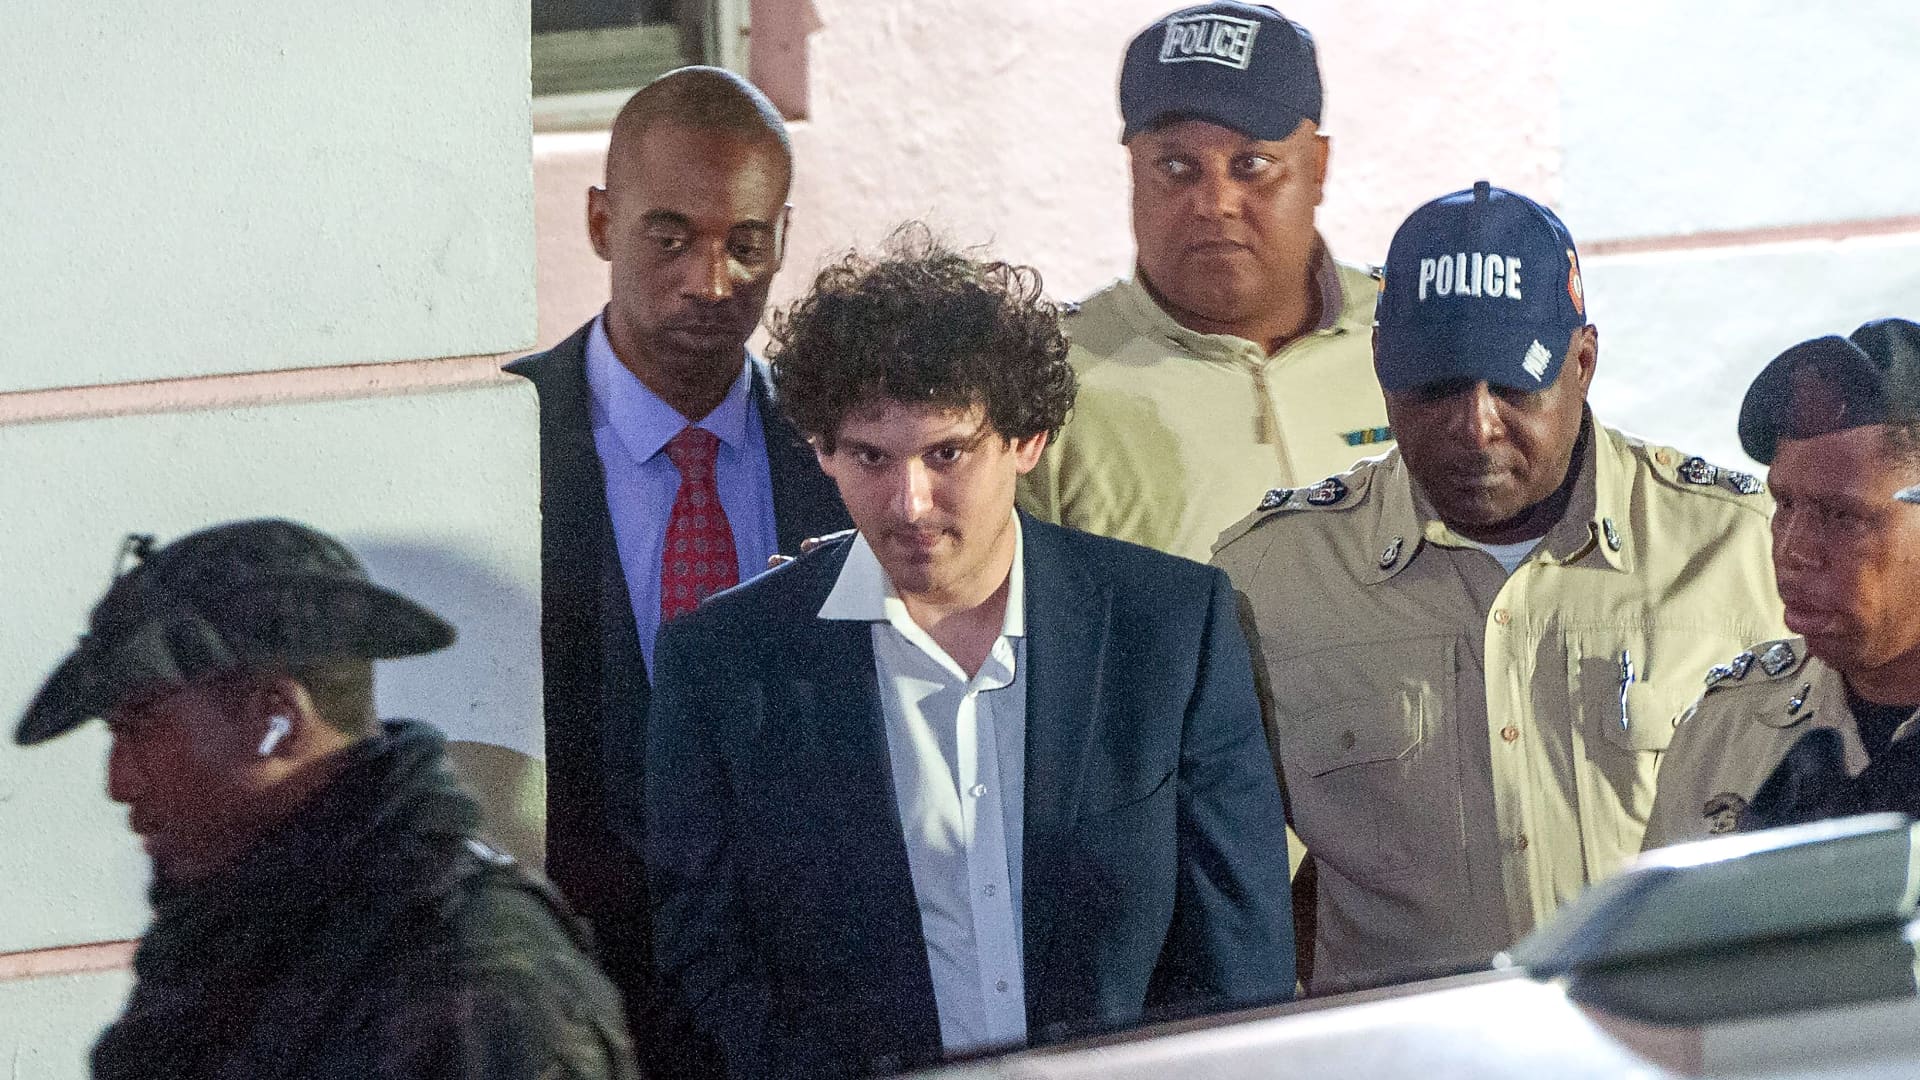 Photo of Photos show disgraced FTX founder Sam Bankman-Fried cuffed in Bahamas on his way to jail